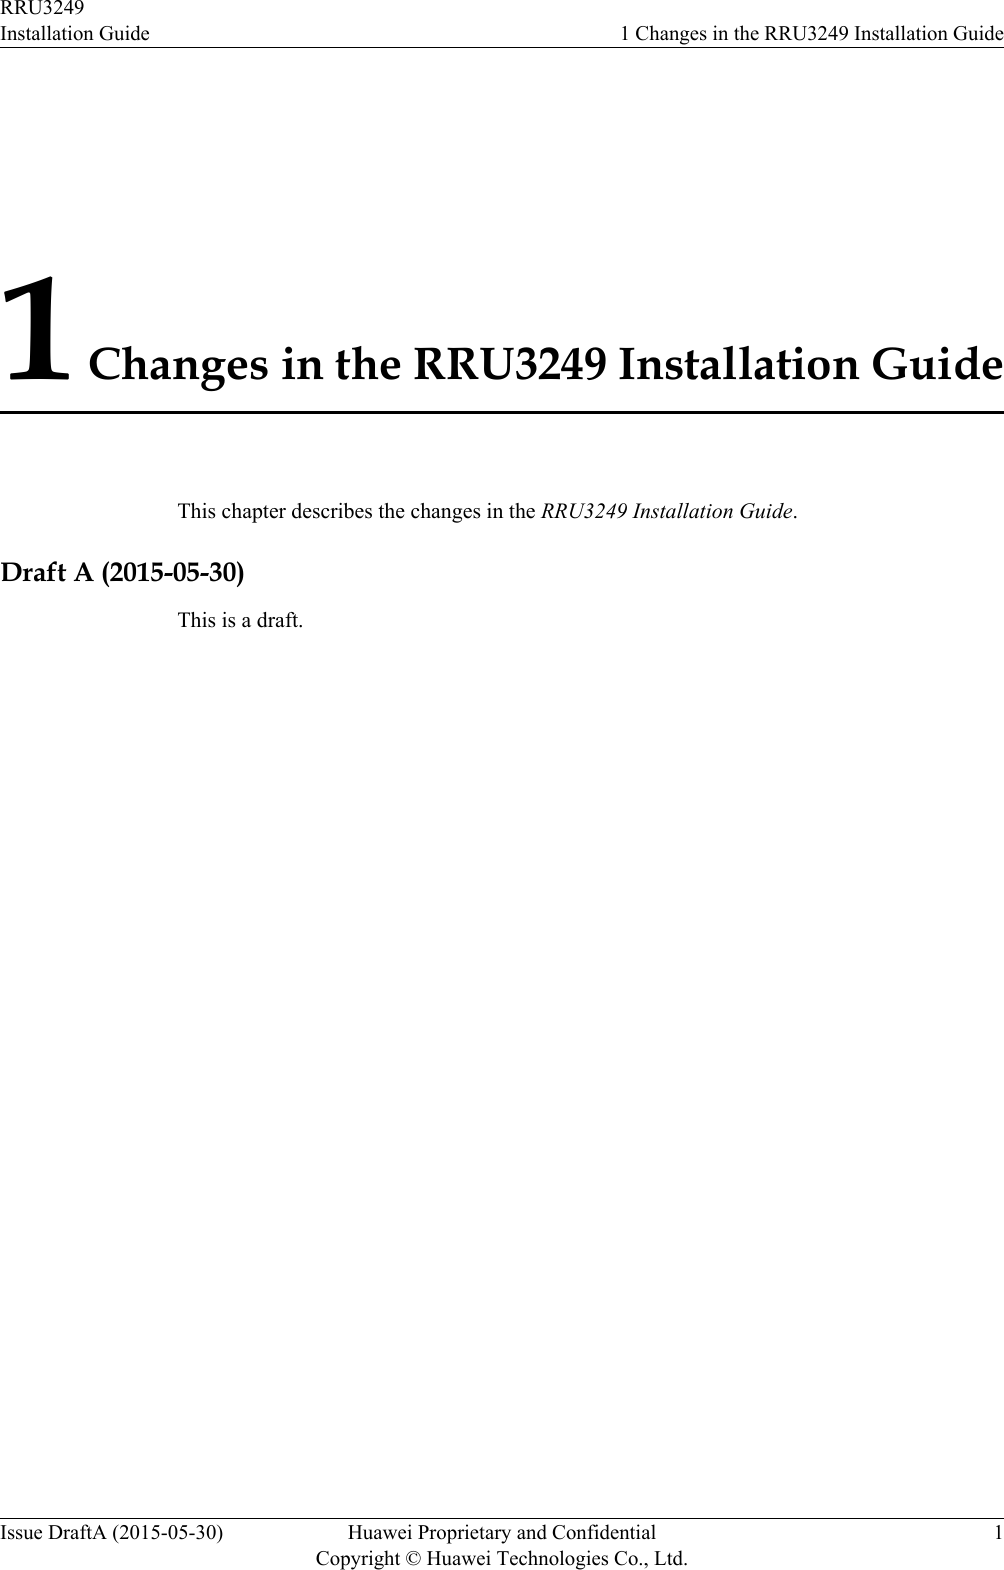 1 Changes in the RRU3249 Installation GuideThis chapter describes the changes in the RRU3249 Installation Guide.Draft A (2015-05-30)This is a draft.RRU3249Installation Guide 1 Changes in the RRU3249 Installation GuideIssue DraftA (2015-05-30) Huawei Proprietary and ConfidentialCopyright © Huawei Technologies Co., Ltd.1